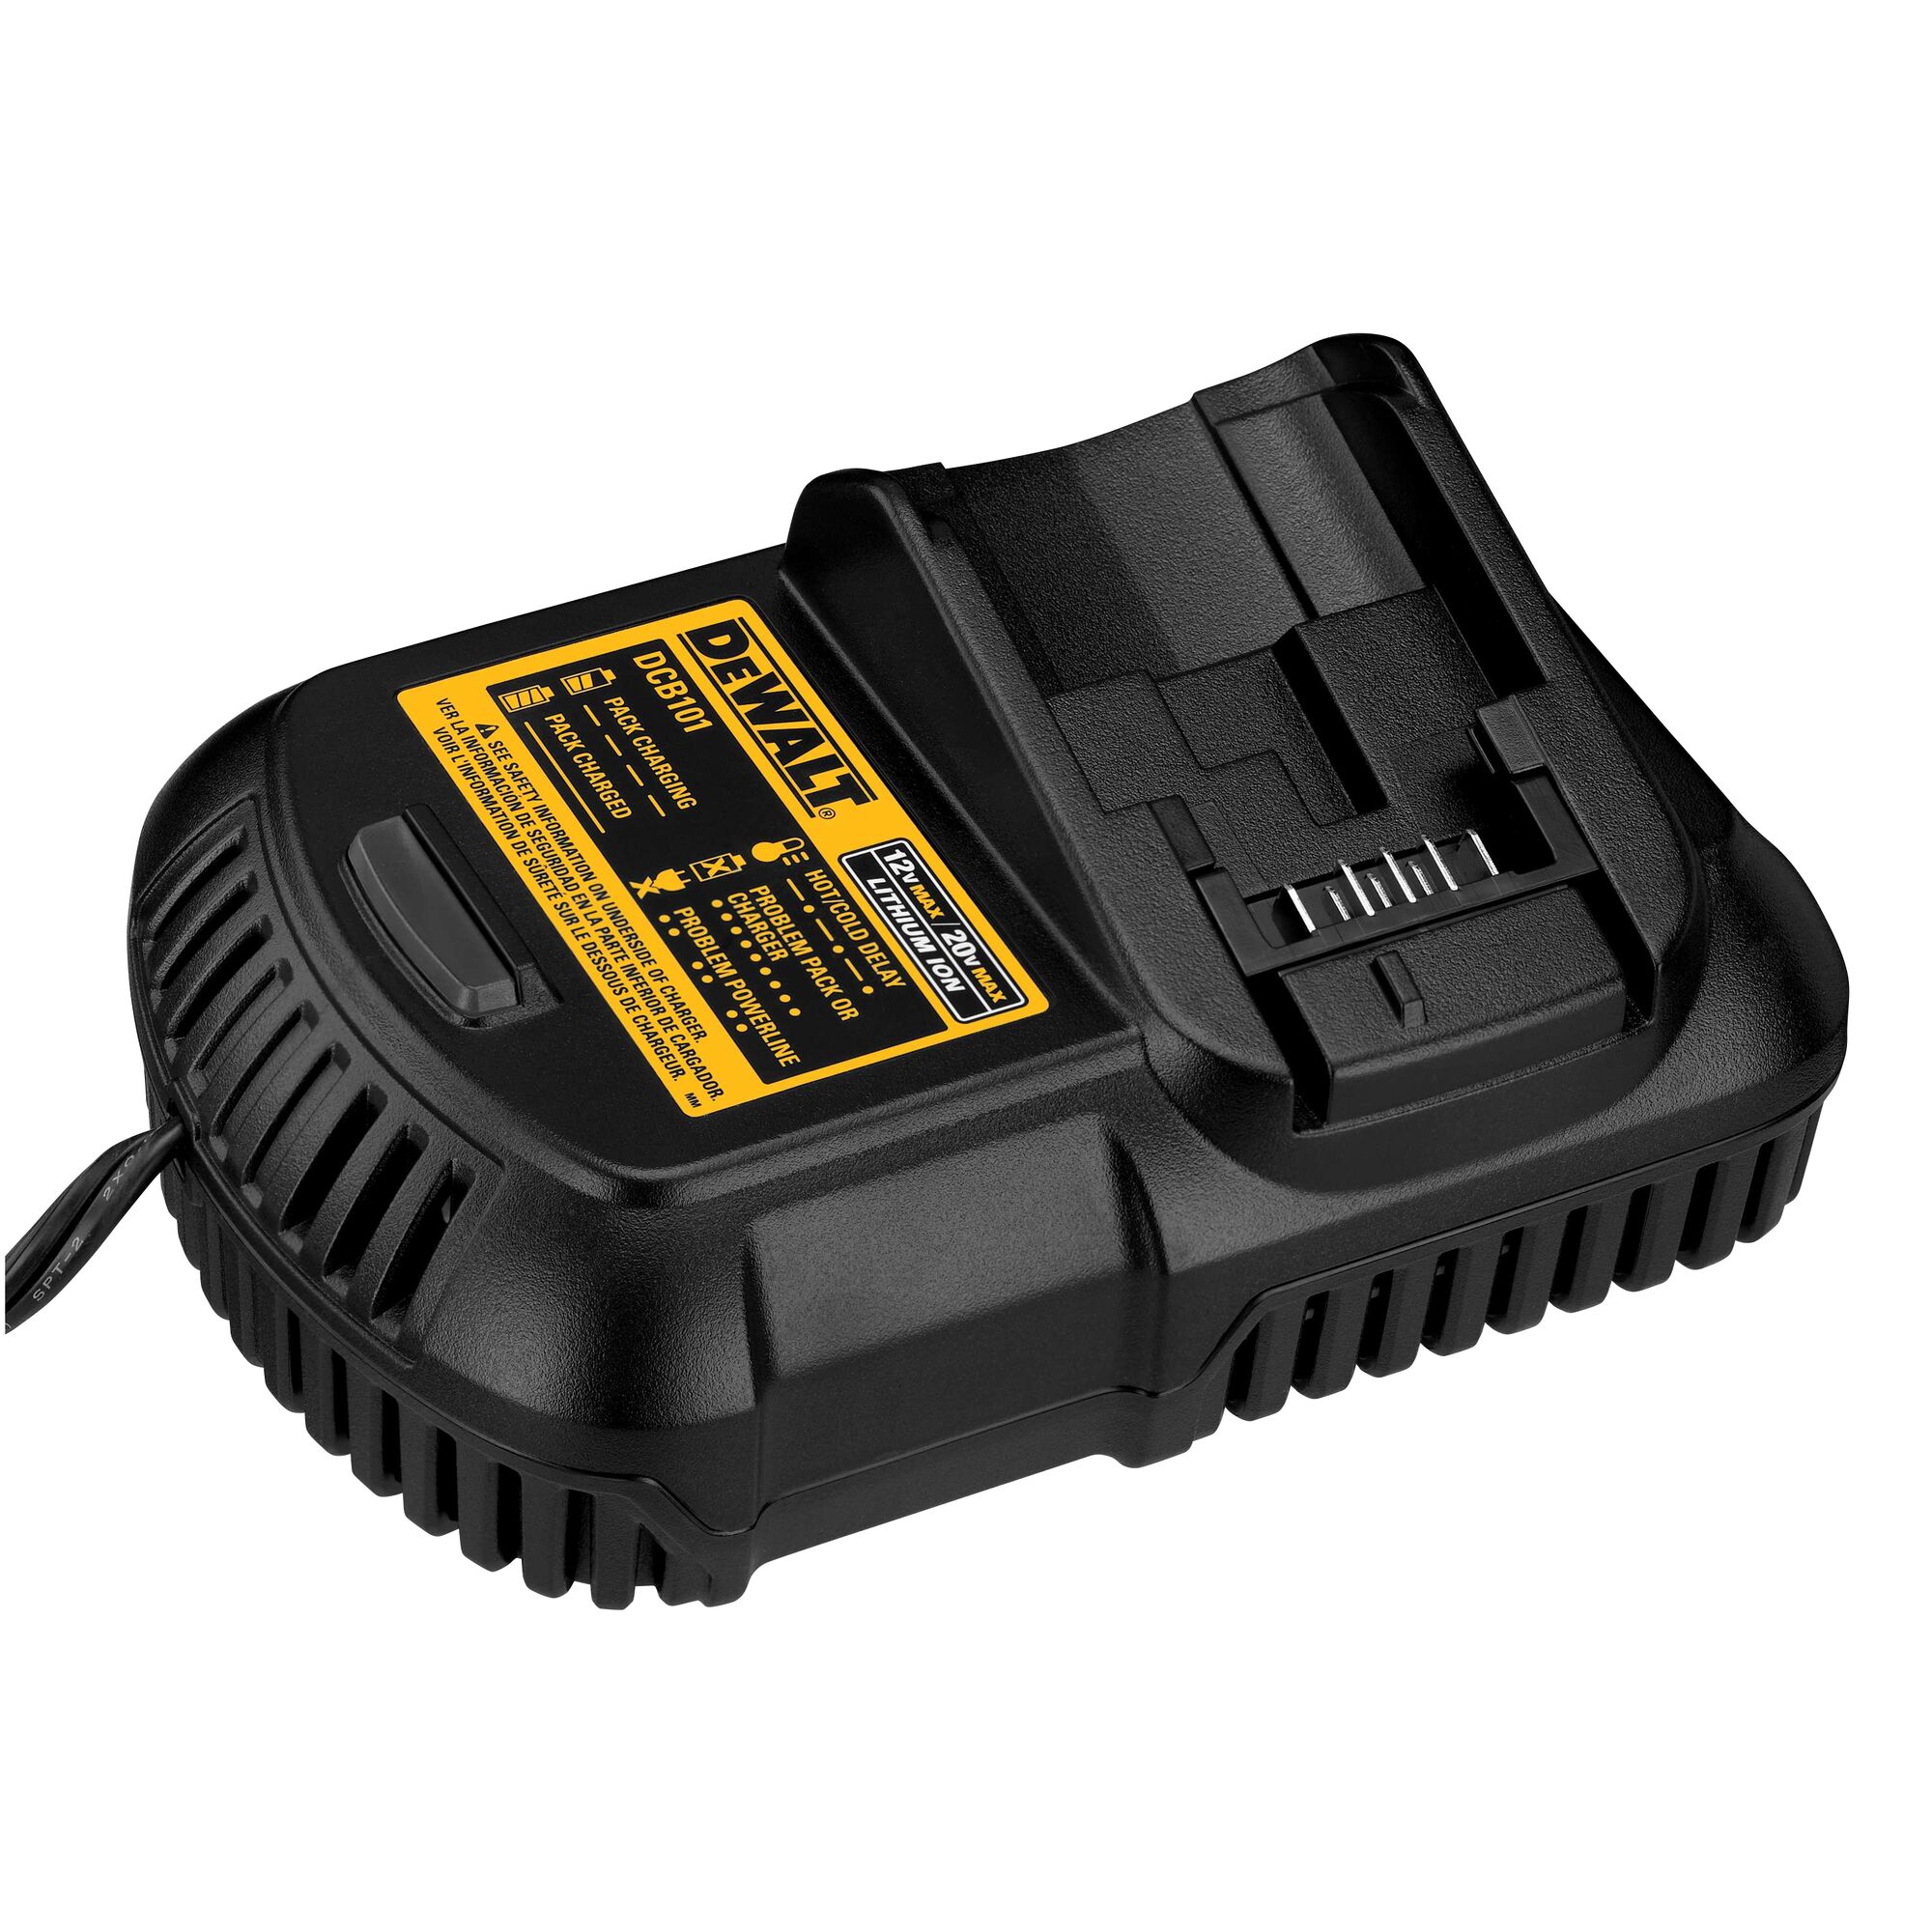 20 Volt Lithium Battery Charger Compatible With 20V Lithium Battery Charger  For Black&Decker 20V Lithium Battery